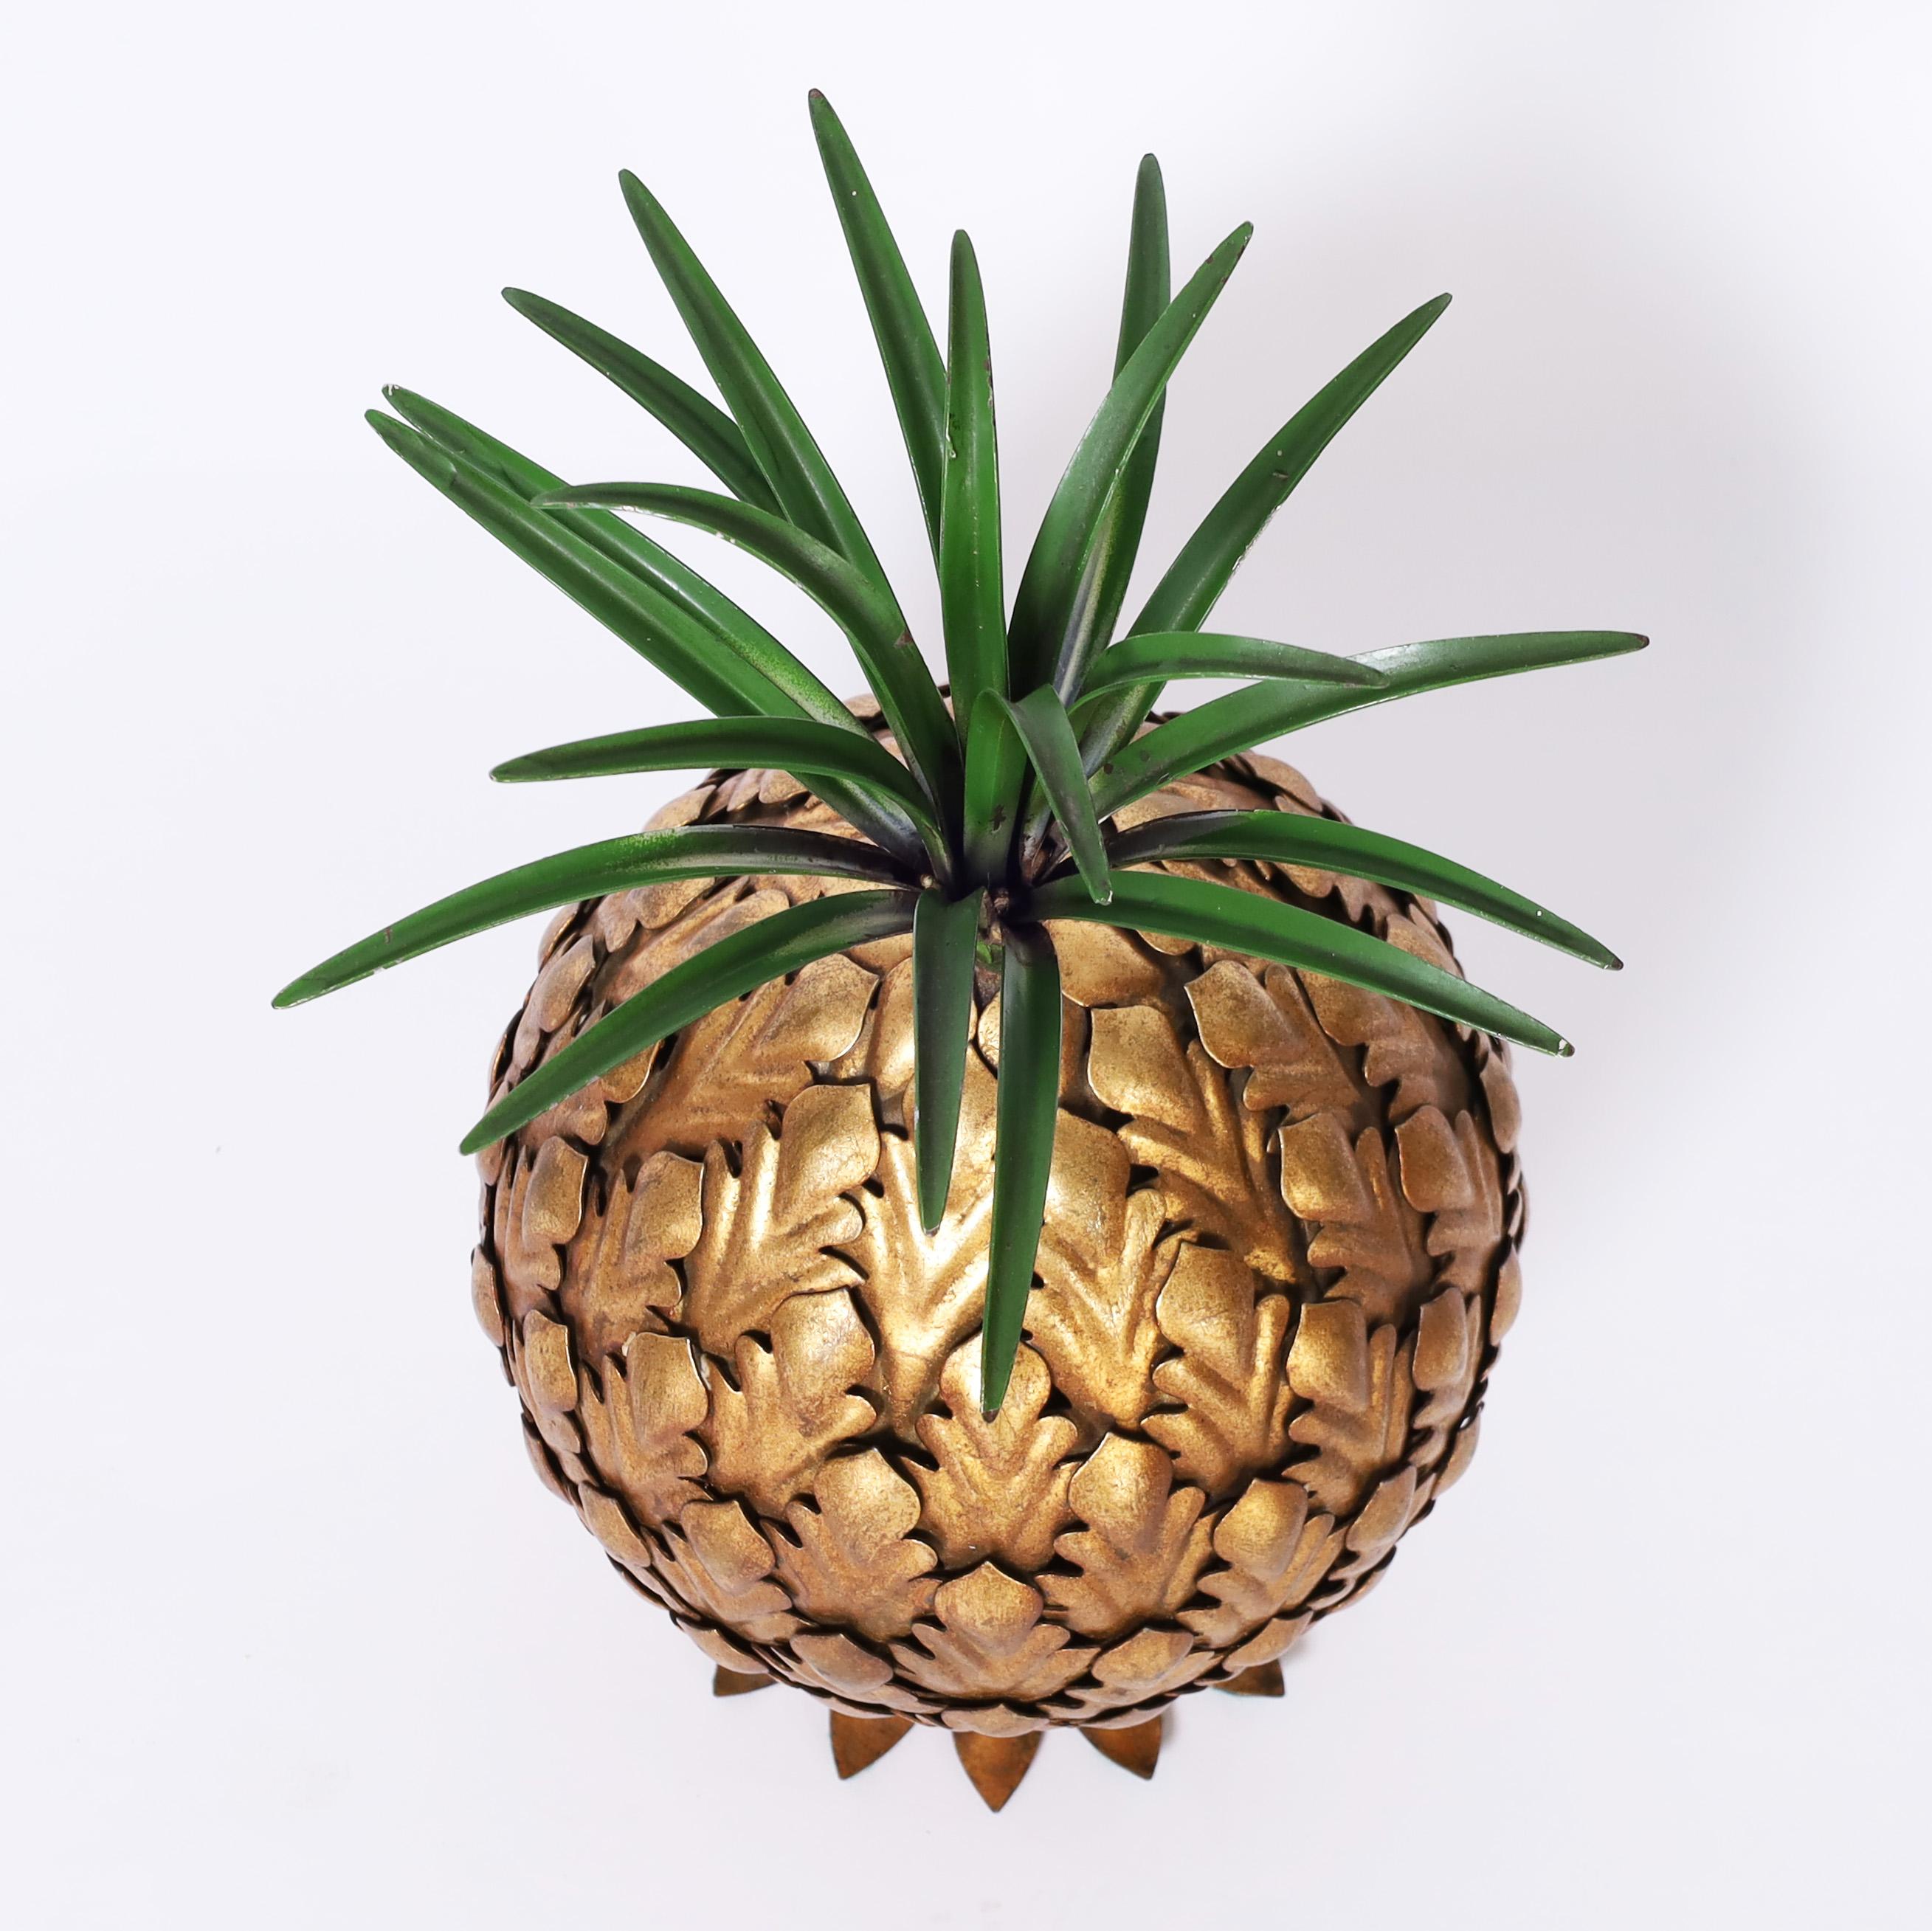 Standout mid century Italian tole sculpture or object of art crafted in metal with a painted green top over a stylized gilt pineapple. Stamped Italy on the bottom. 